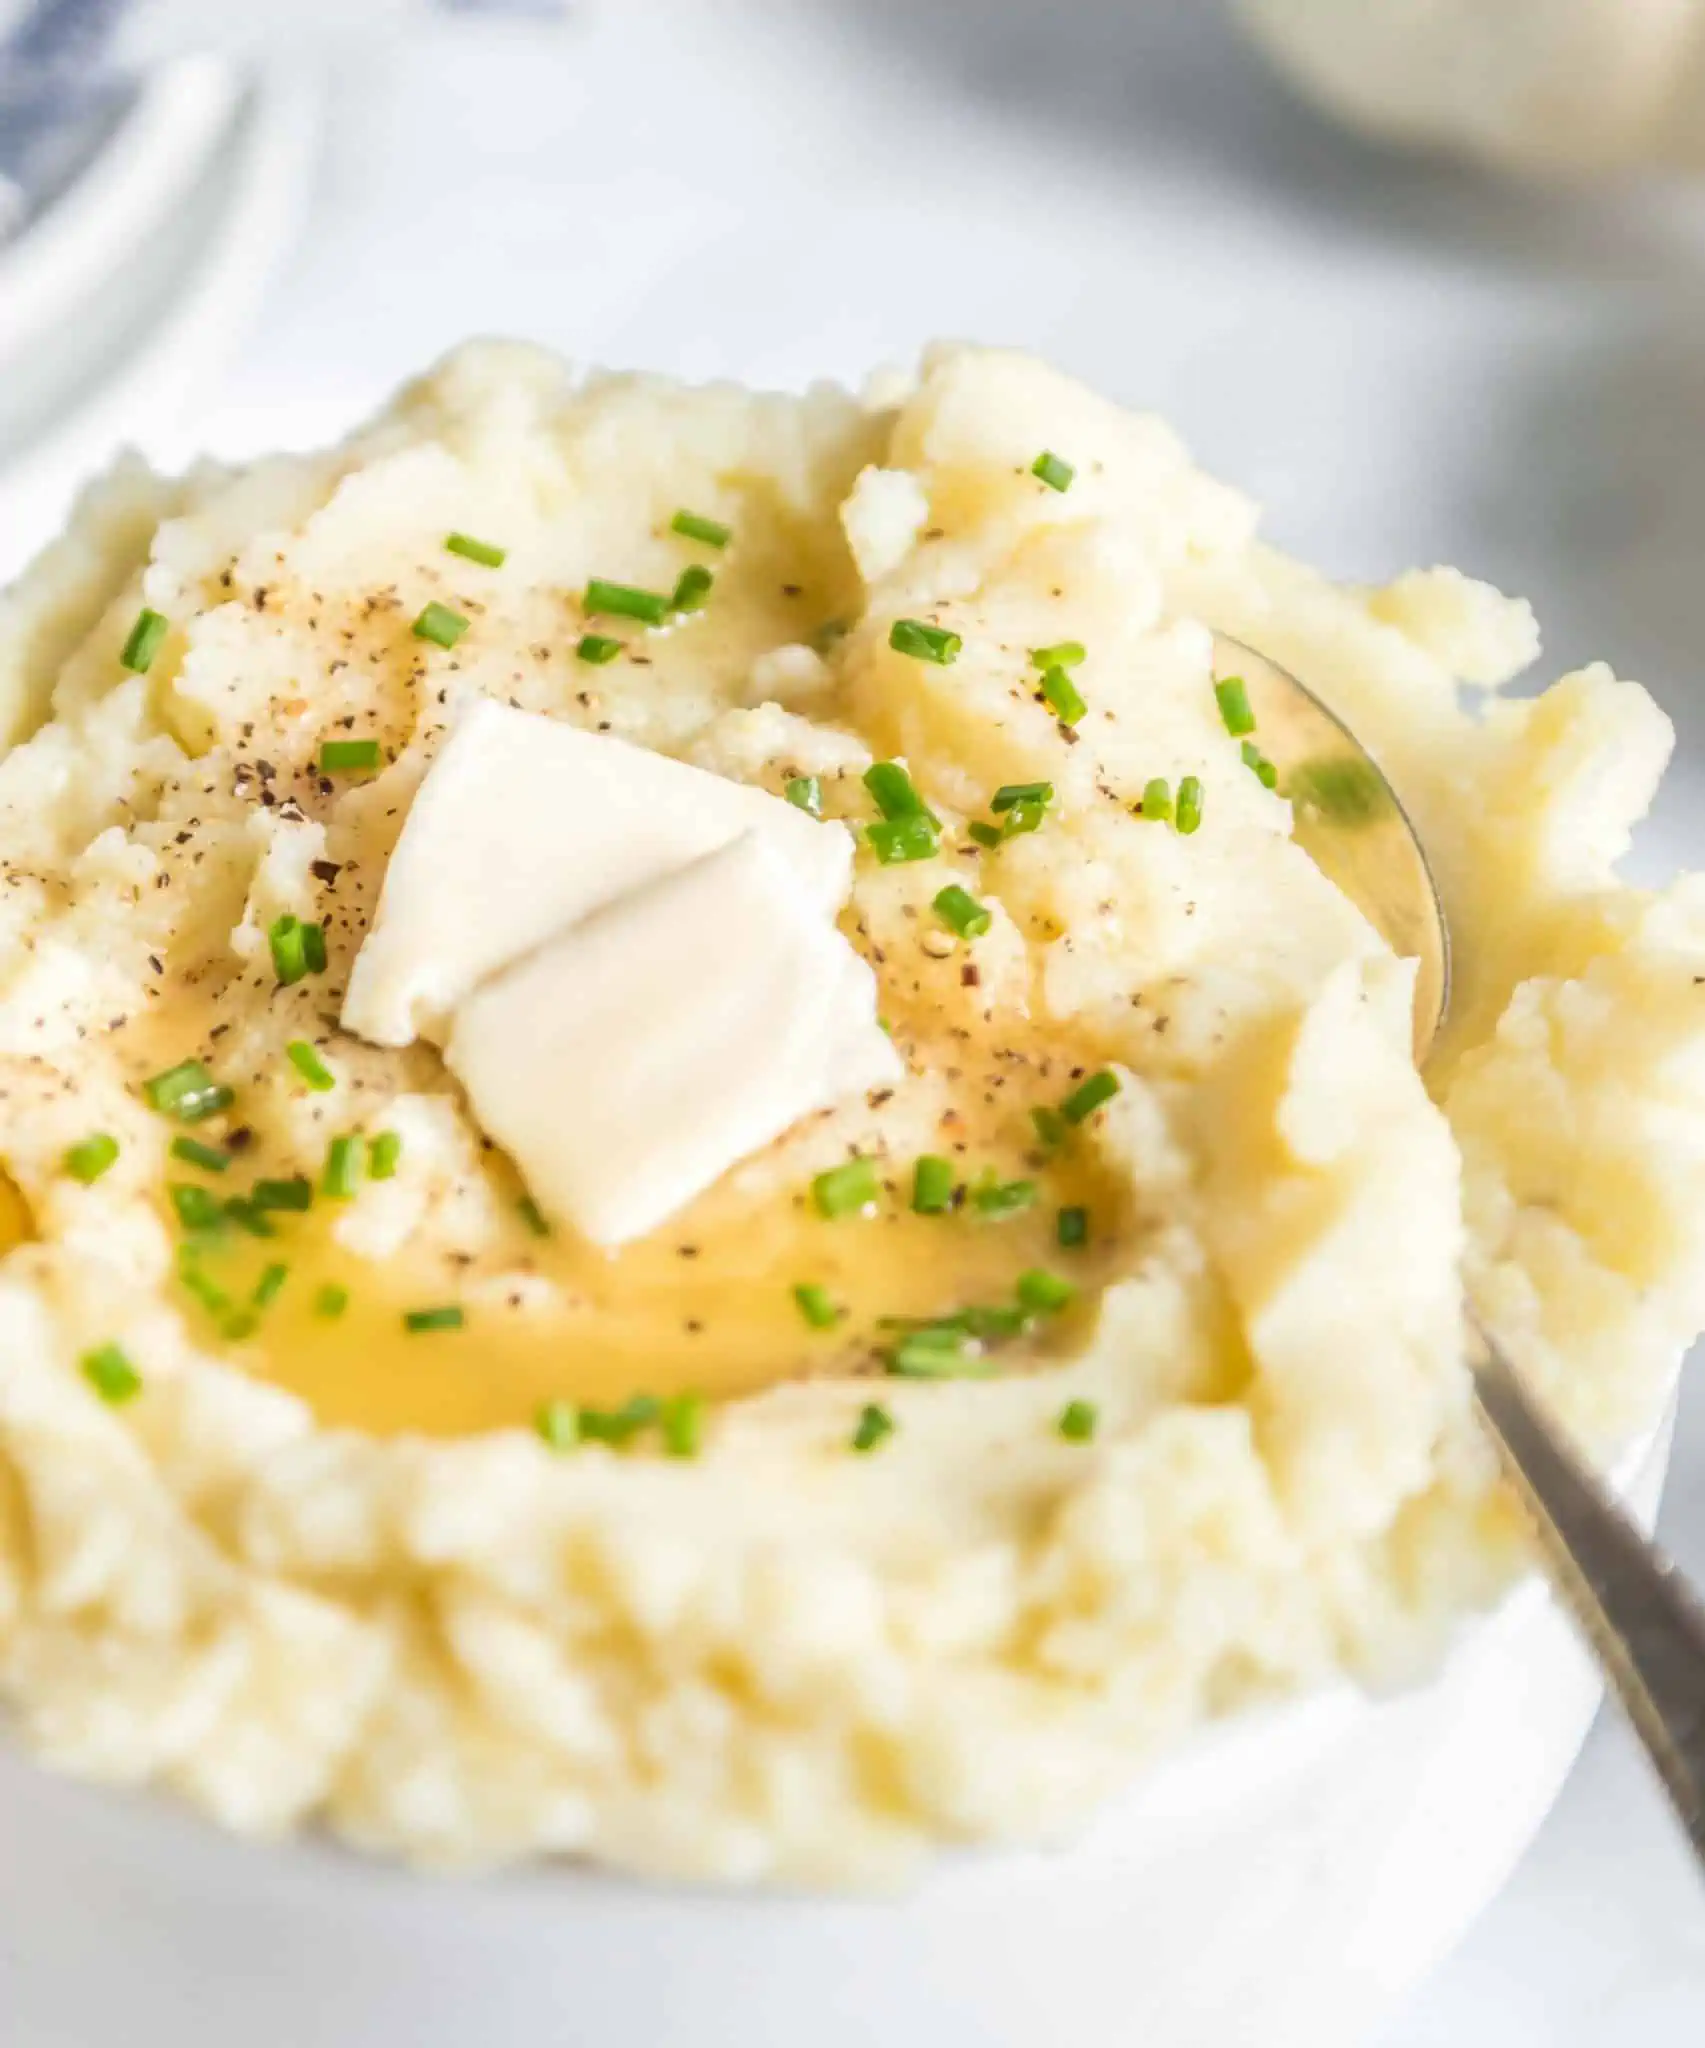 Dairy-free mashed potatoes in a bowl with serving spoon and topped with vegan butter.